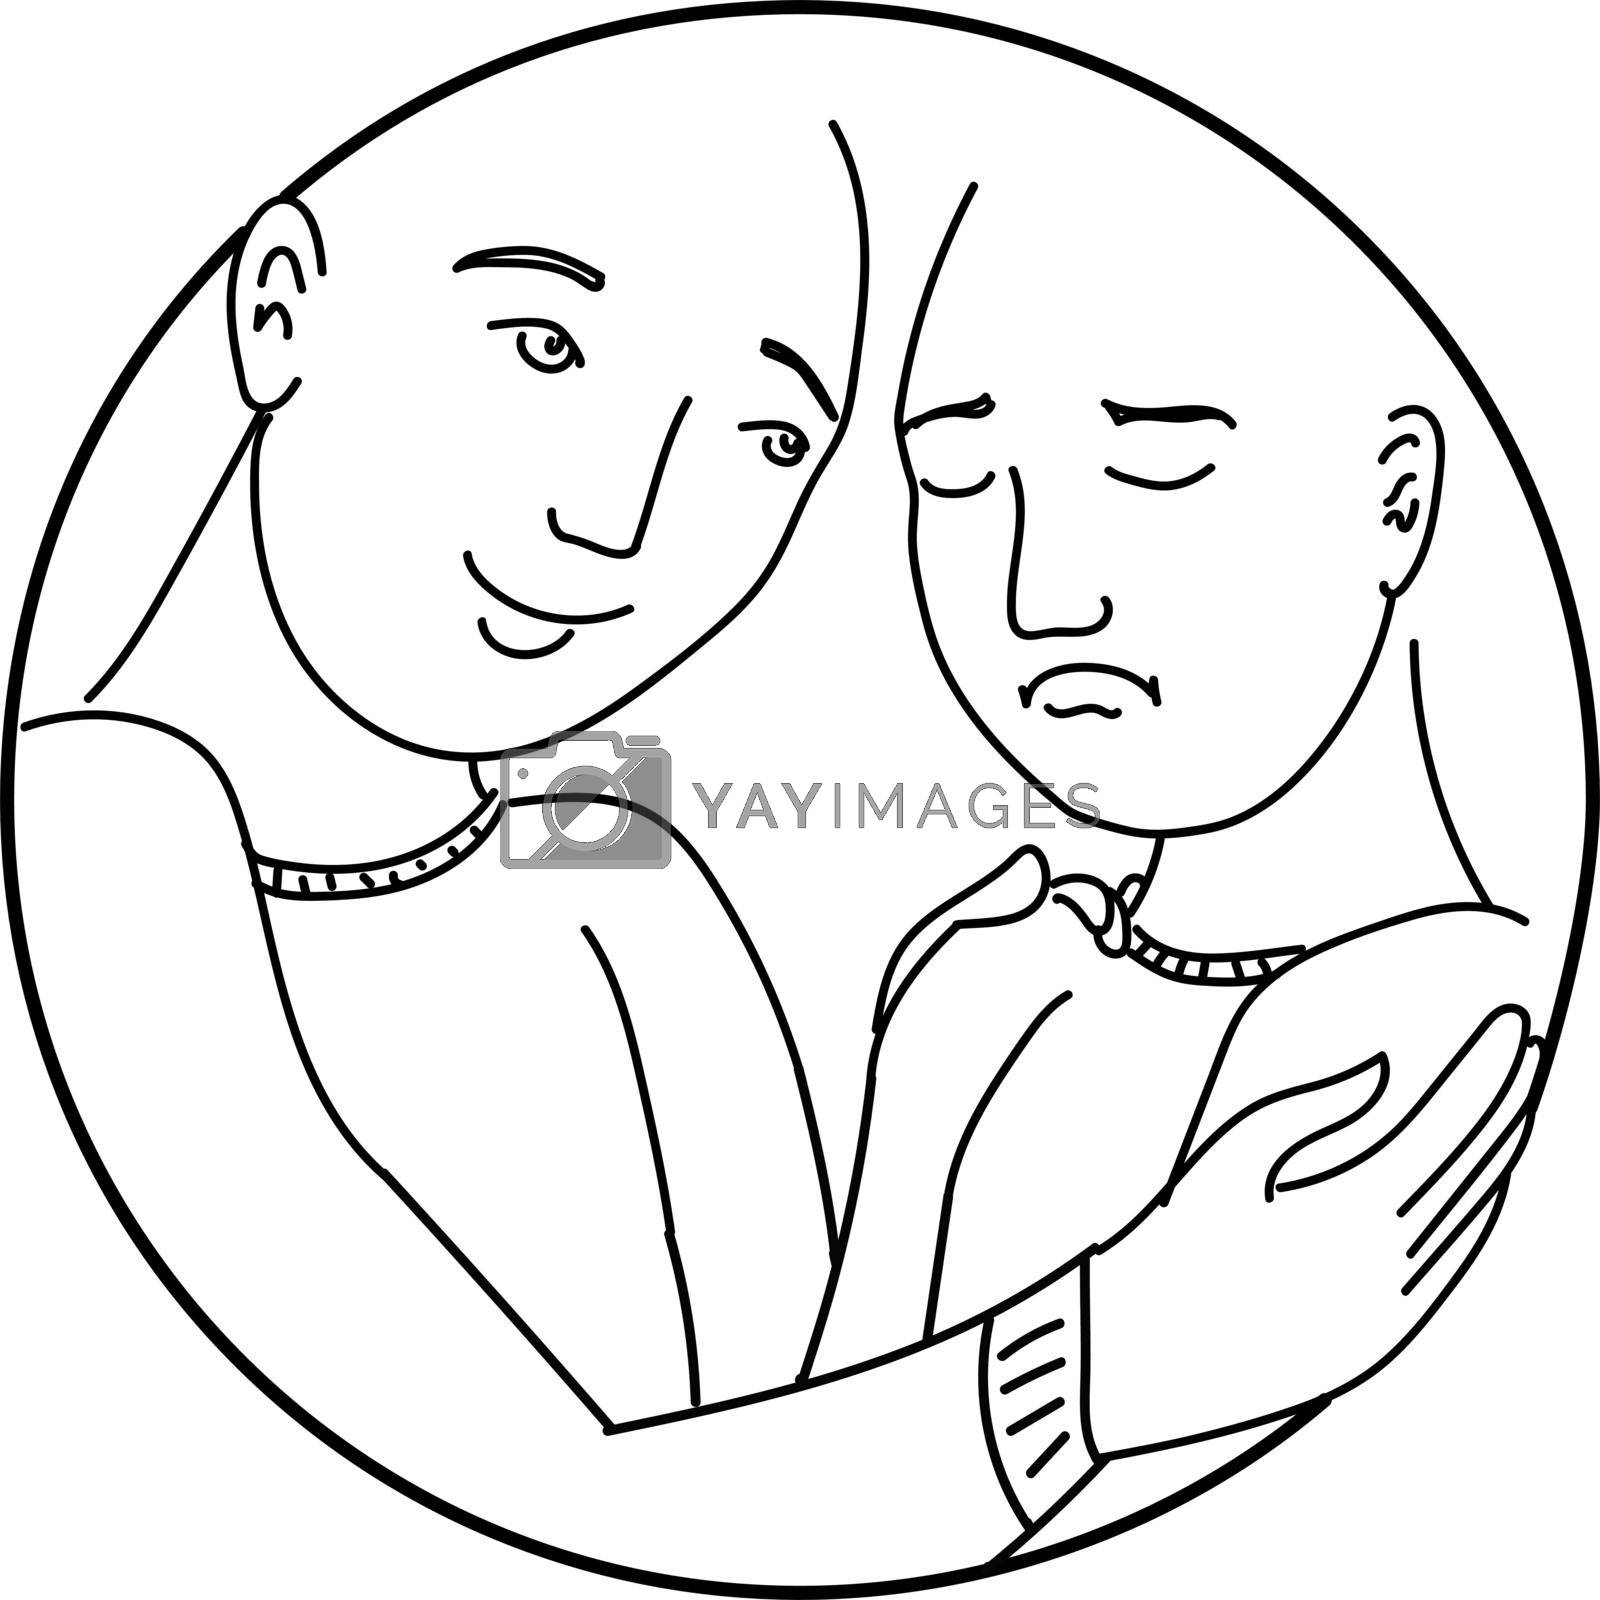 Royalty free image of People calming each other. Friends or lovers are together when their close person in trouble. by Arinase